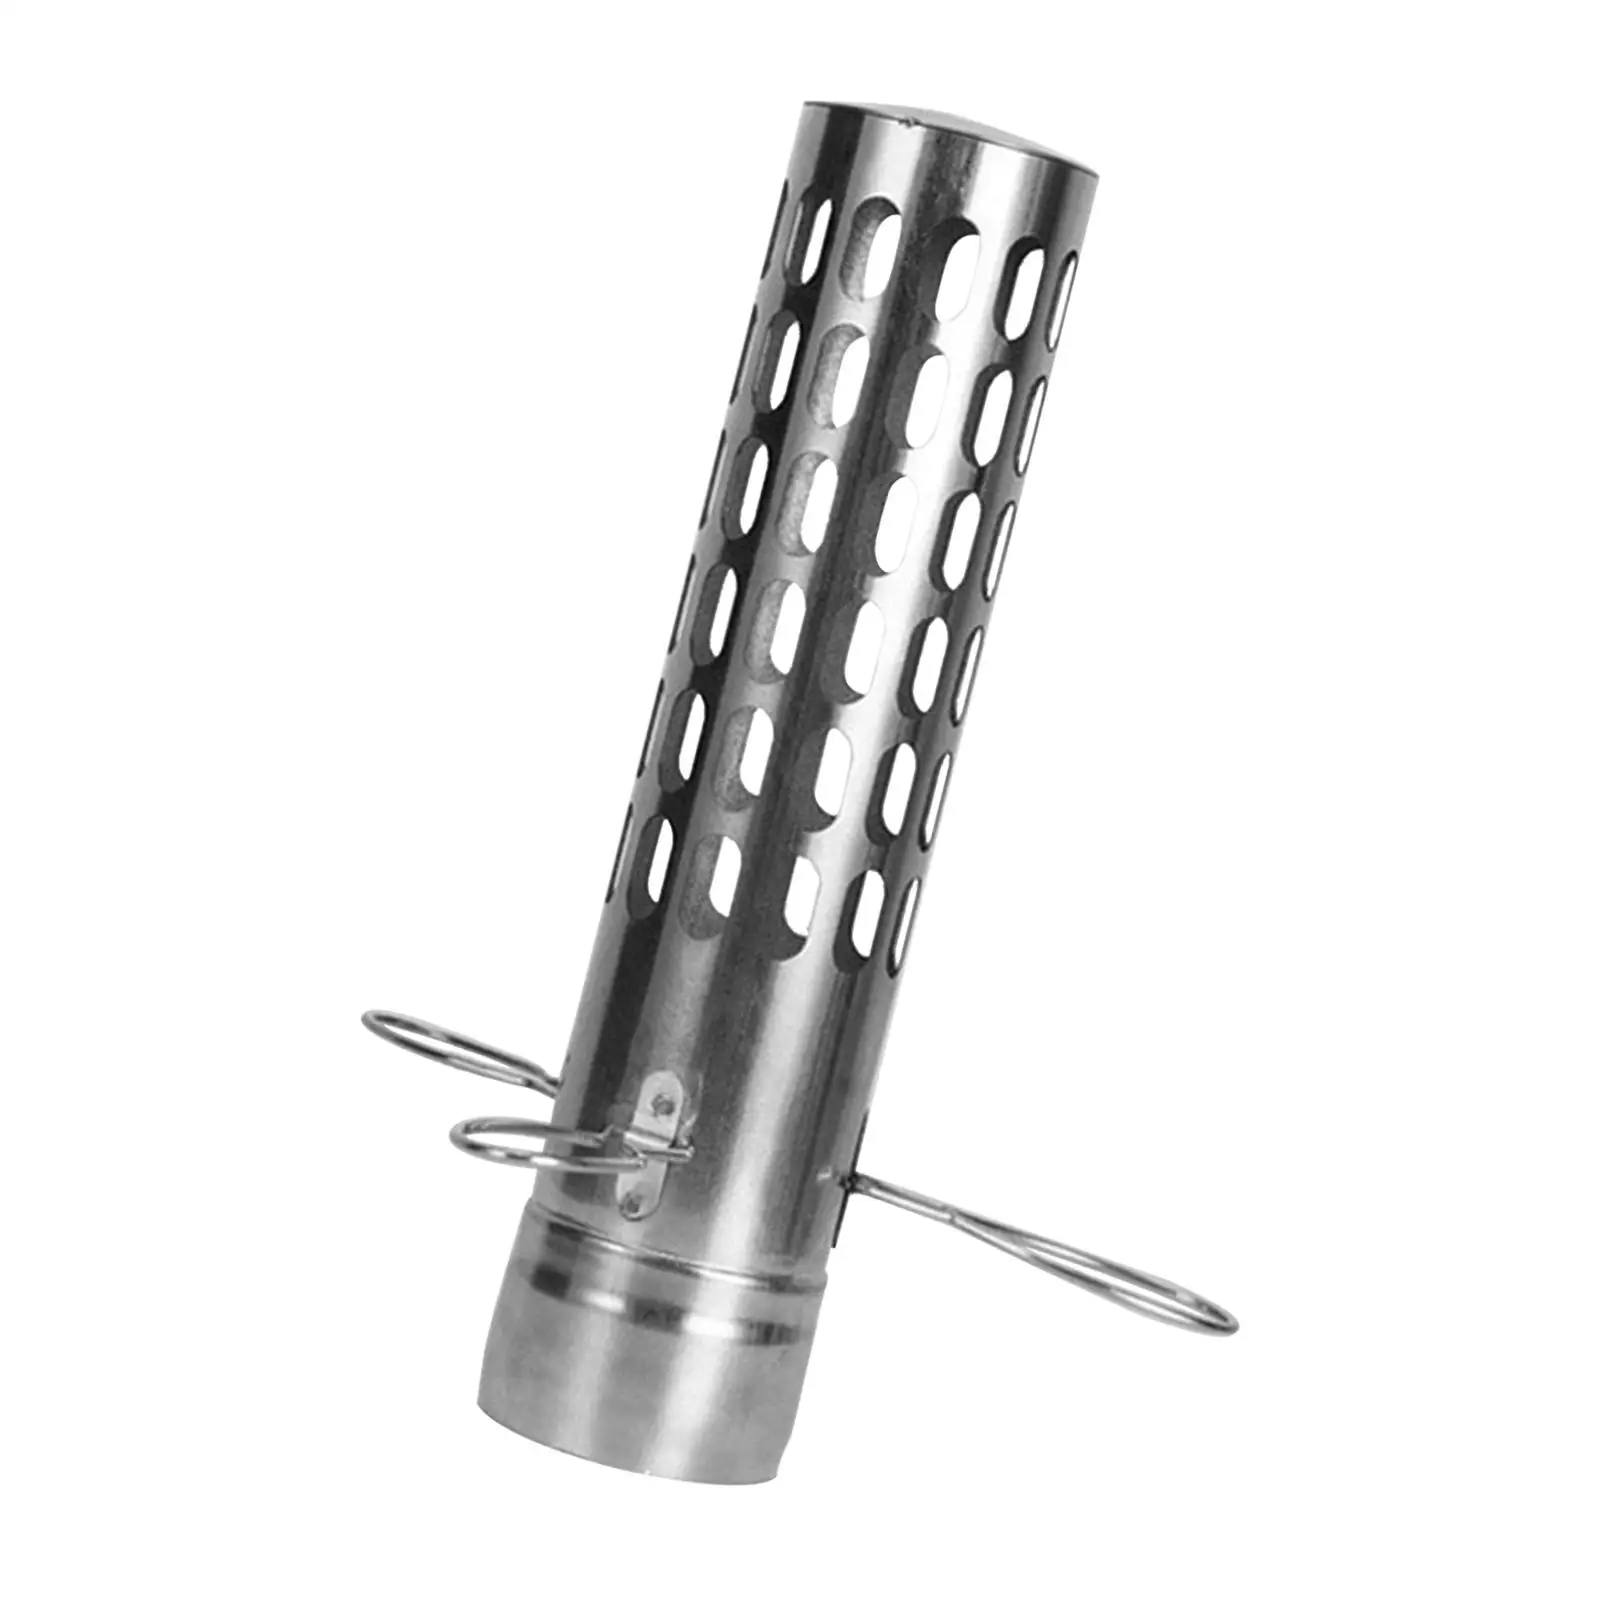 Stainless Steel Stove Chimney Accessories Furnace Tube Flue Exhaust Heater for